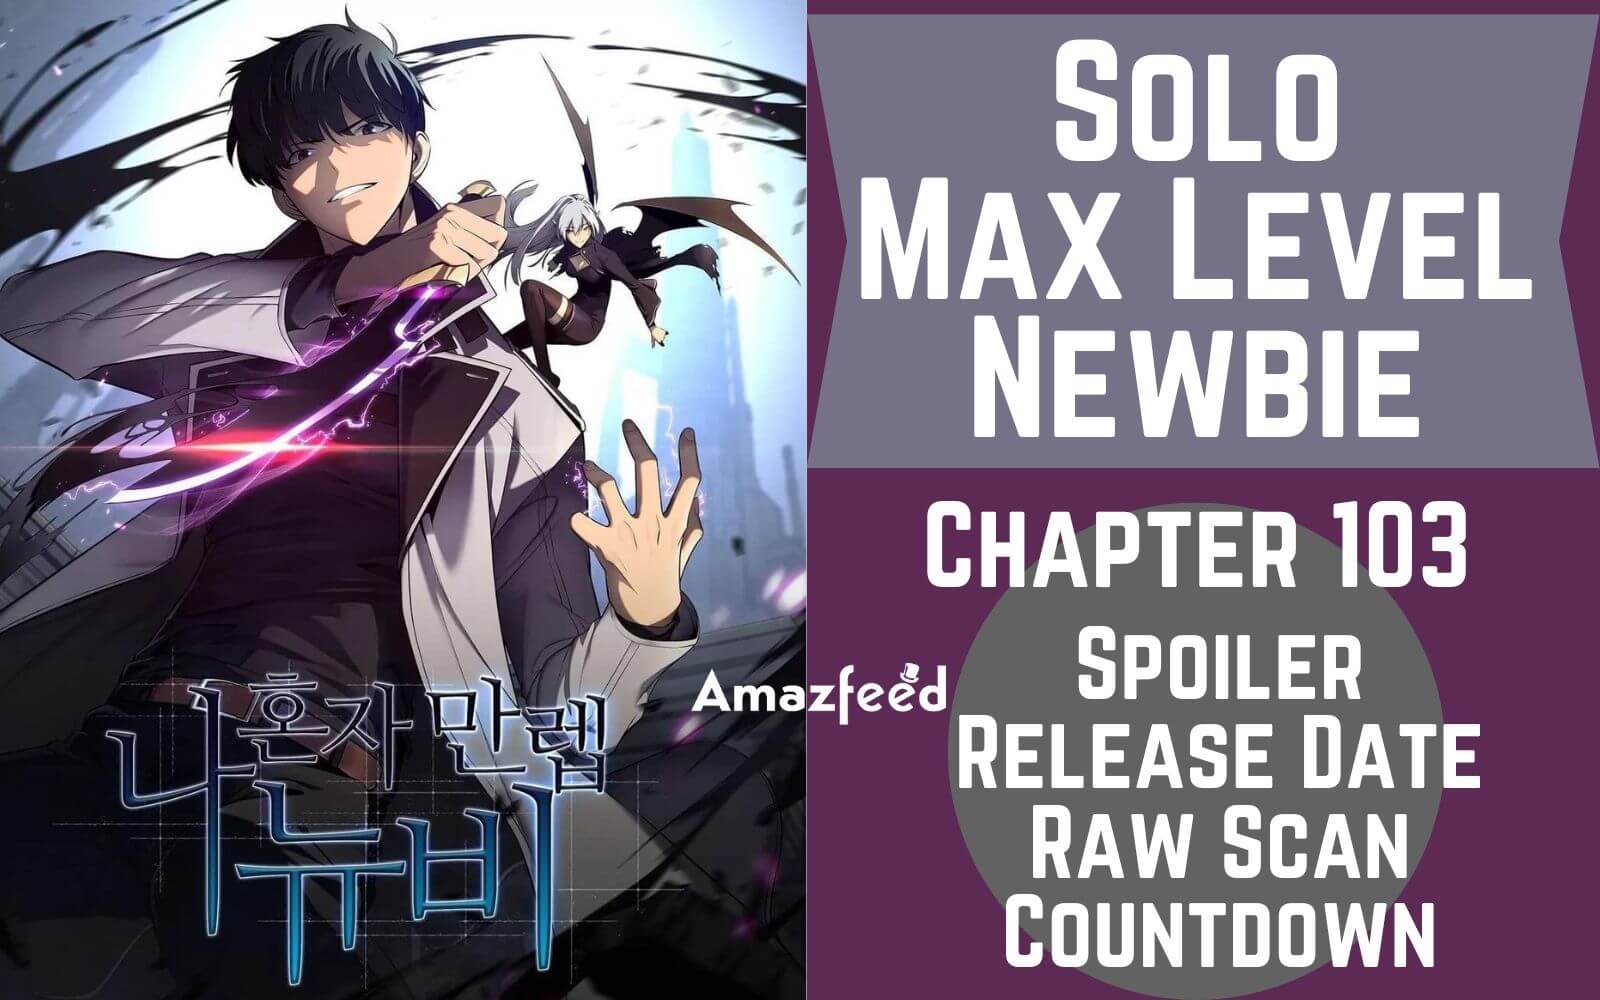 solo max-level newbie chapter 53 - Solo Max-Level Newbie Manga Online